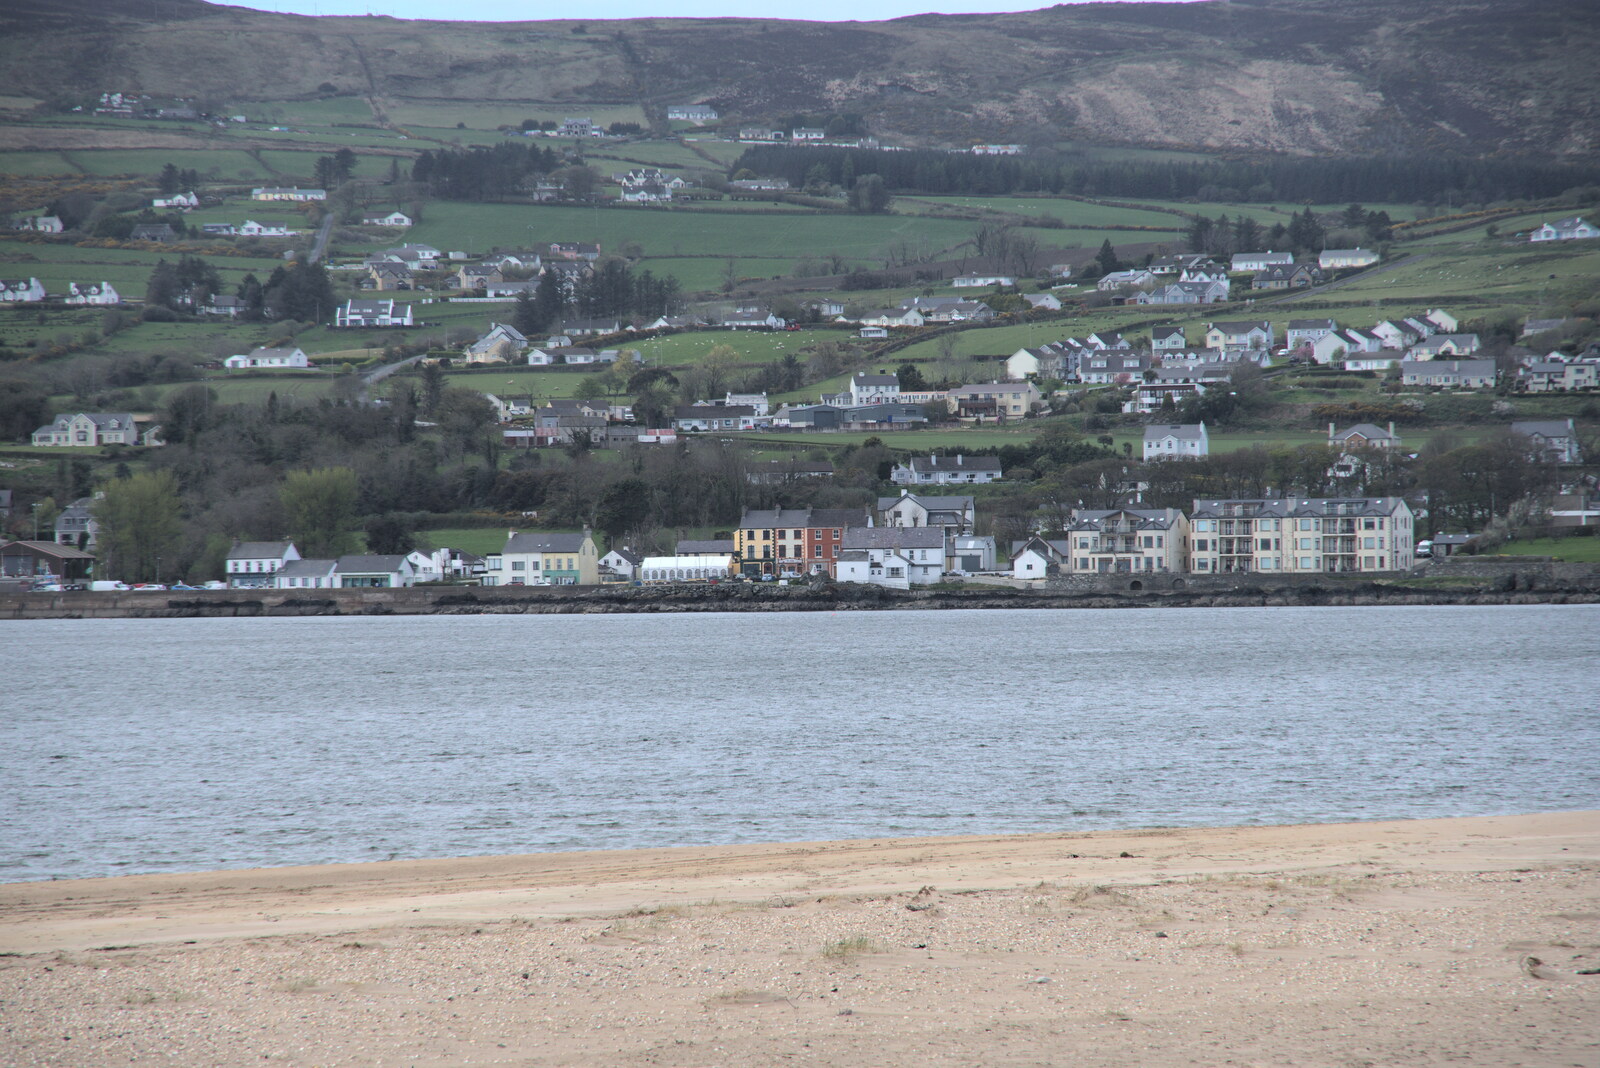 Greencastle, Doagh and Malin Head, County Donegal, Ireland - 19th April 2022: We spot our apartment, on the left